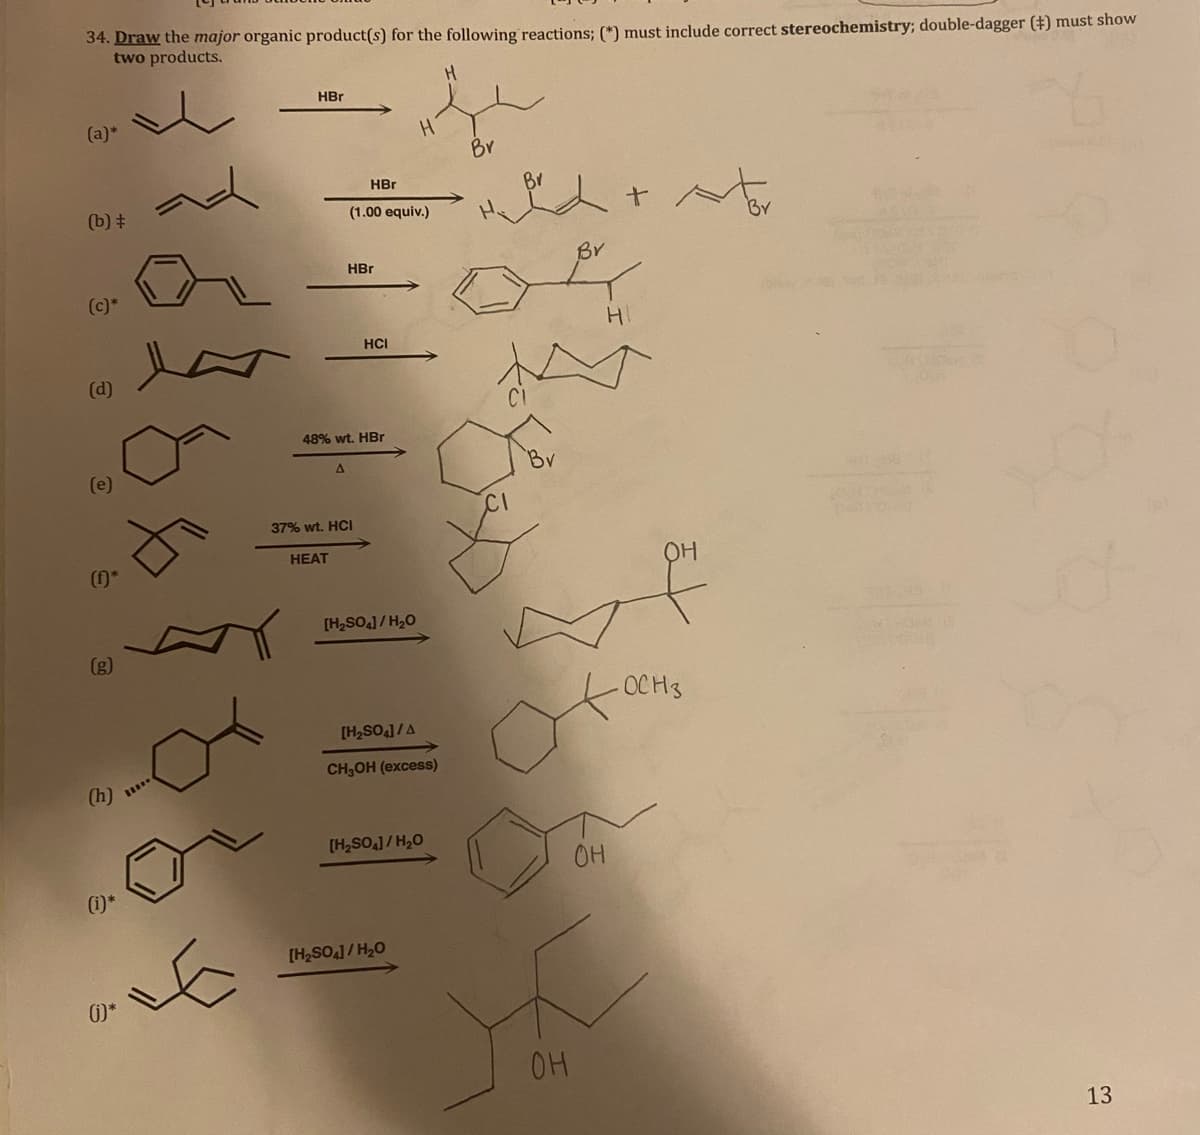 34. Draw the major organic product(s) for the following reactions; (*) must include correct stereochemistry; double-dagger (+) must show
two products.
HBr
(a)*
Br
HBr
Br
(b) +
(1.00 equiv.)
Br
Br
HBr
(c)*
HCI
(d)
48% wt. HBr
37% wt. HCI
HEAT
OH
[H2SO]/ H20
(g)
OCH3
[H2SO,]/A
CH,OH (excess)
(h)
[H,SO,1/H20
OH
(i)*
[H2SO,] / H,0
OH
13
